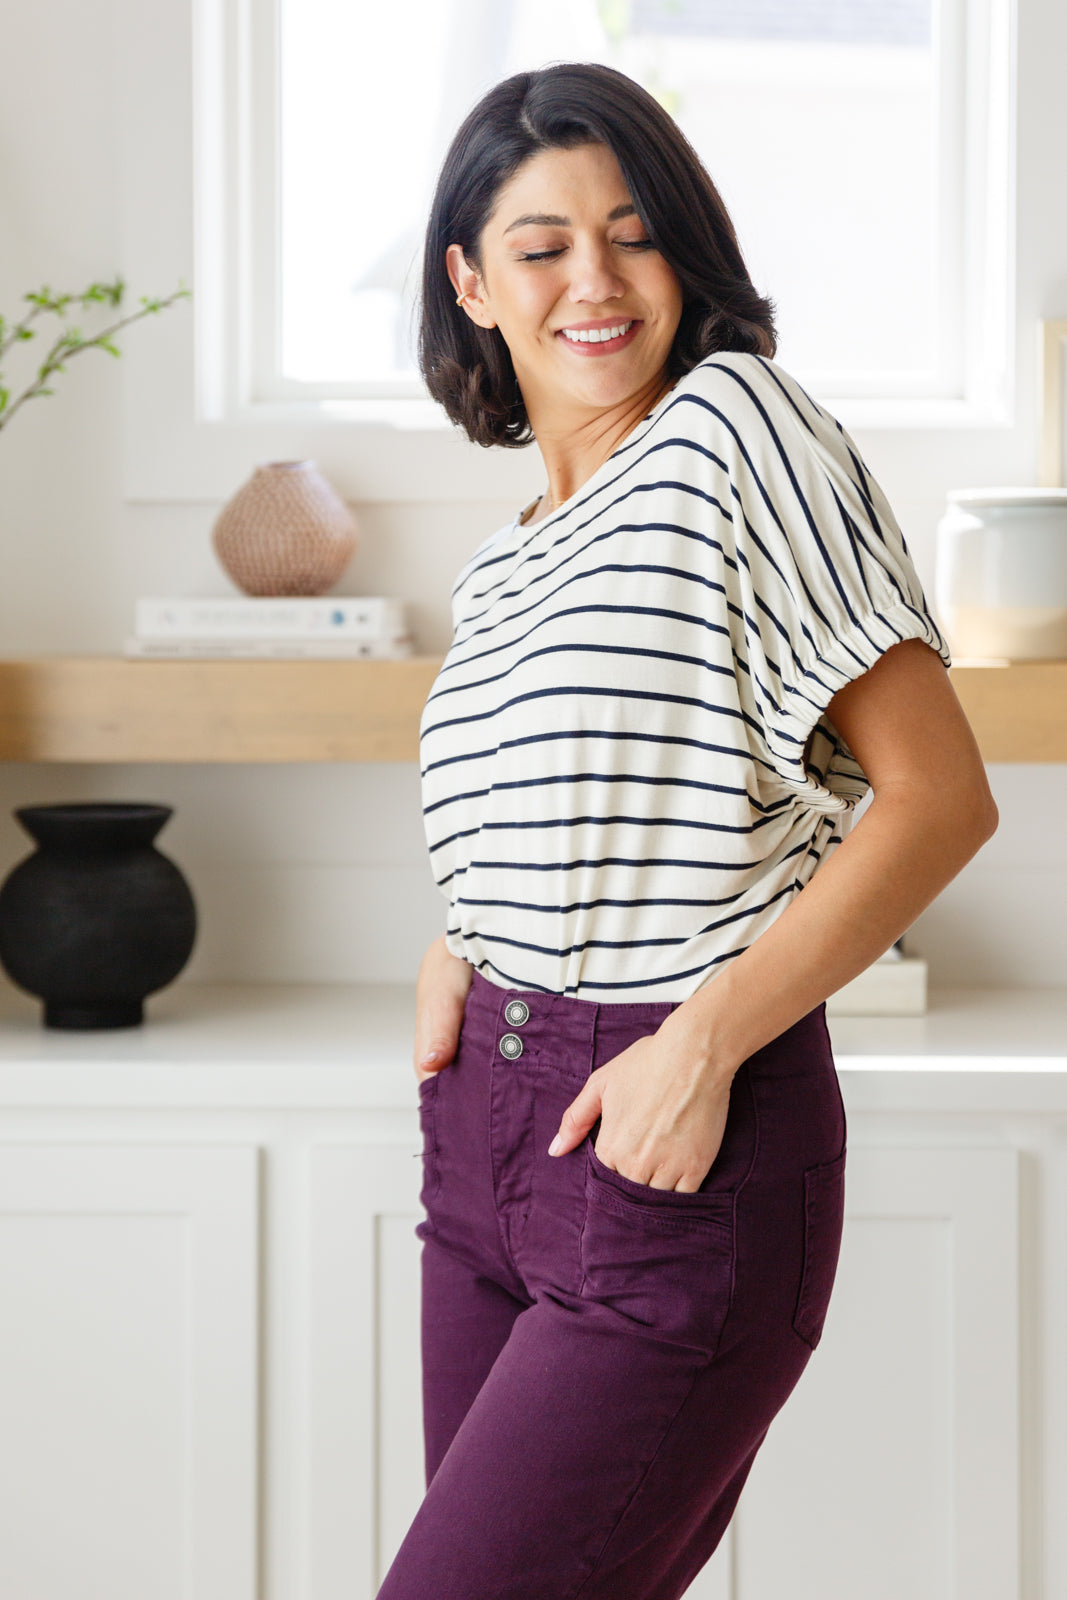 Much Ado About Nothing Striped Top